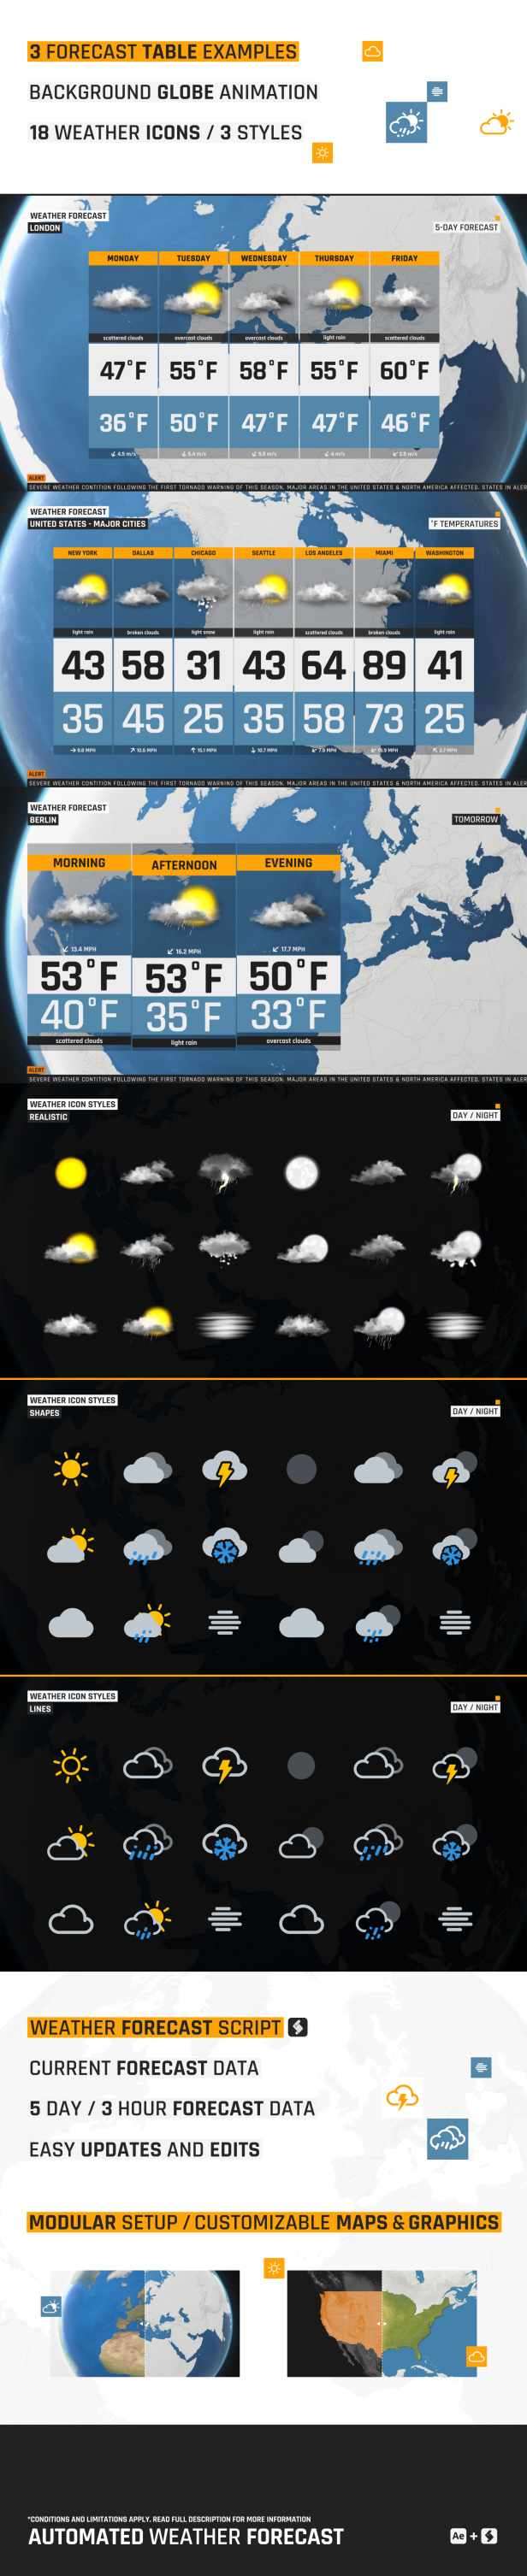 Automated WEATHER Forecast - Script and Template for After Effects - 4